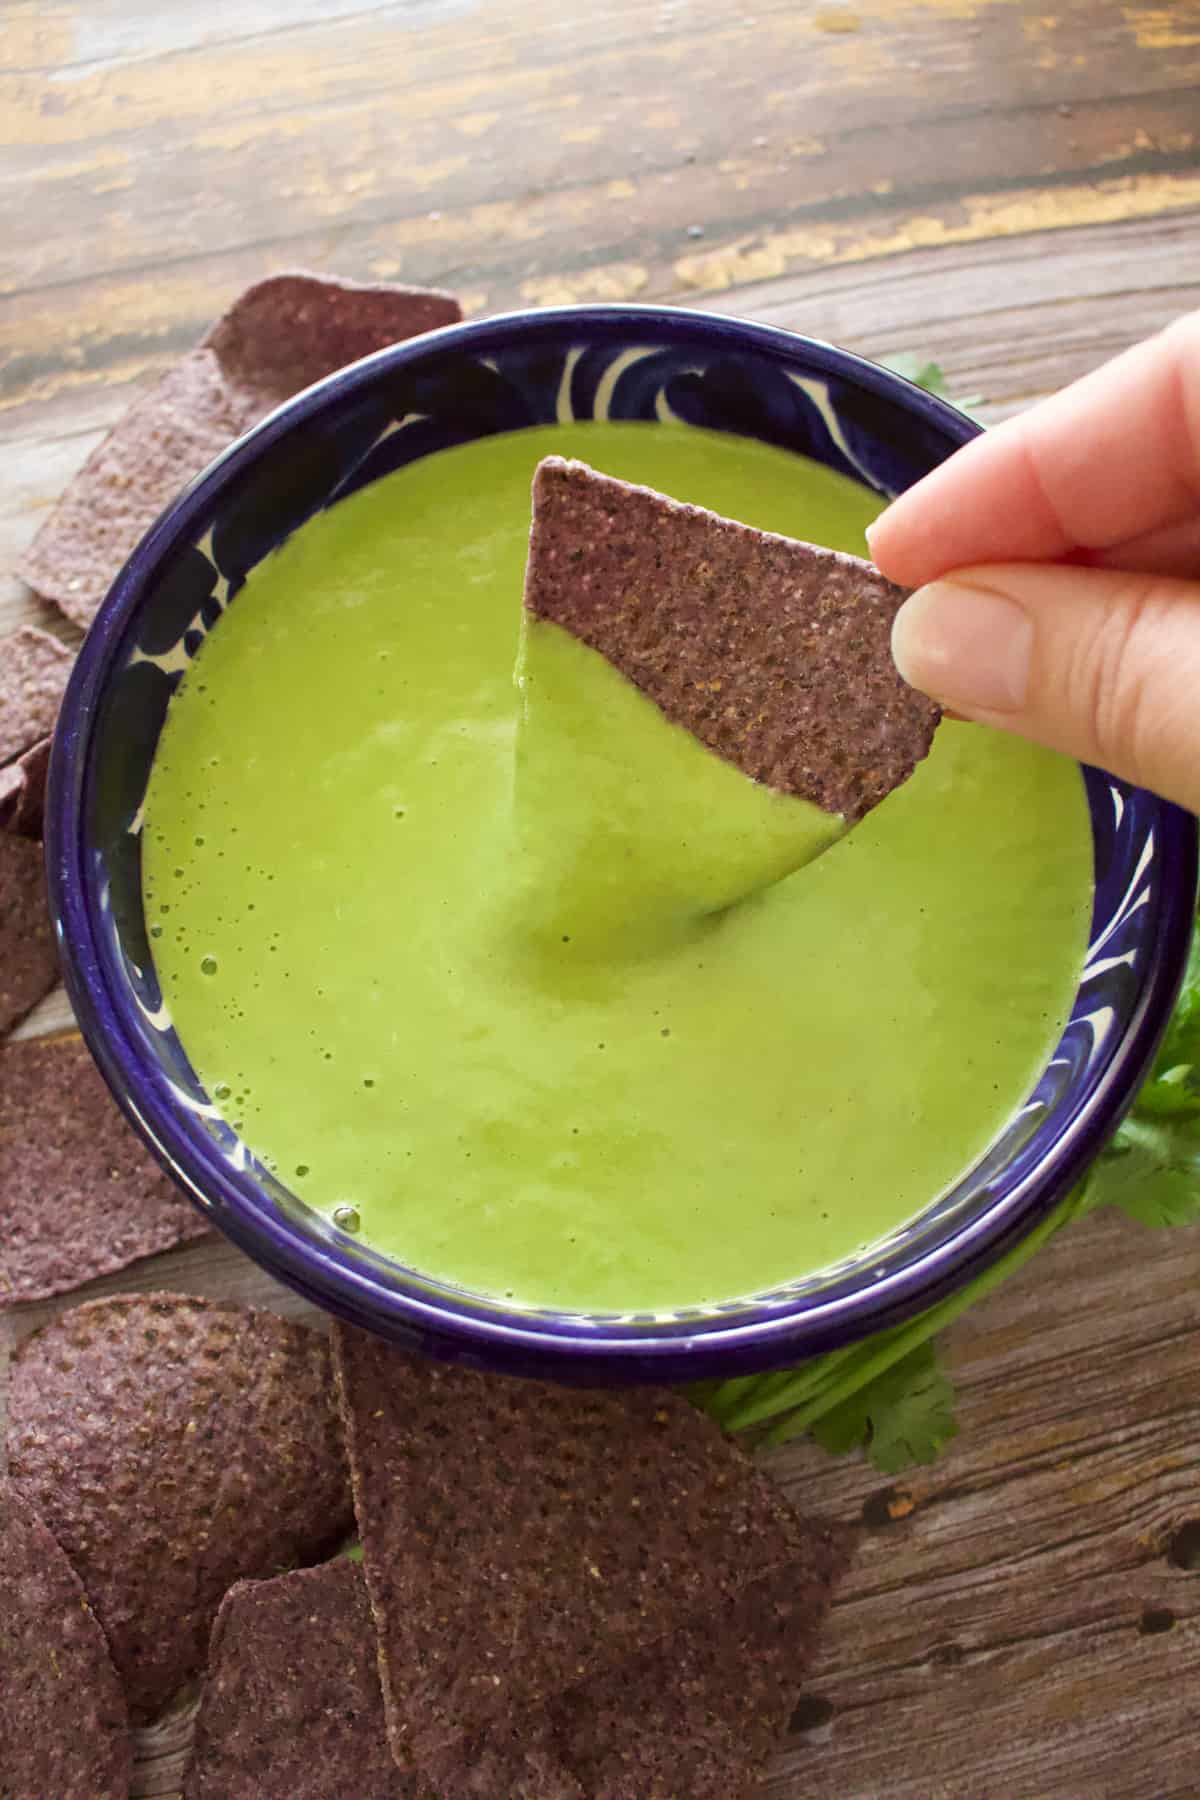 A hand dipping a chip into a bowl of jalapeno salsa.